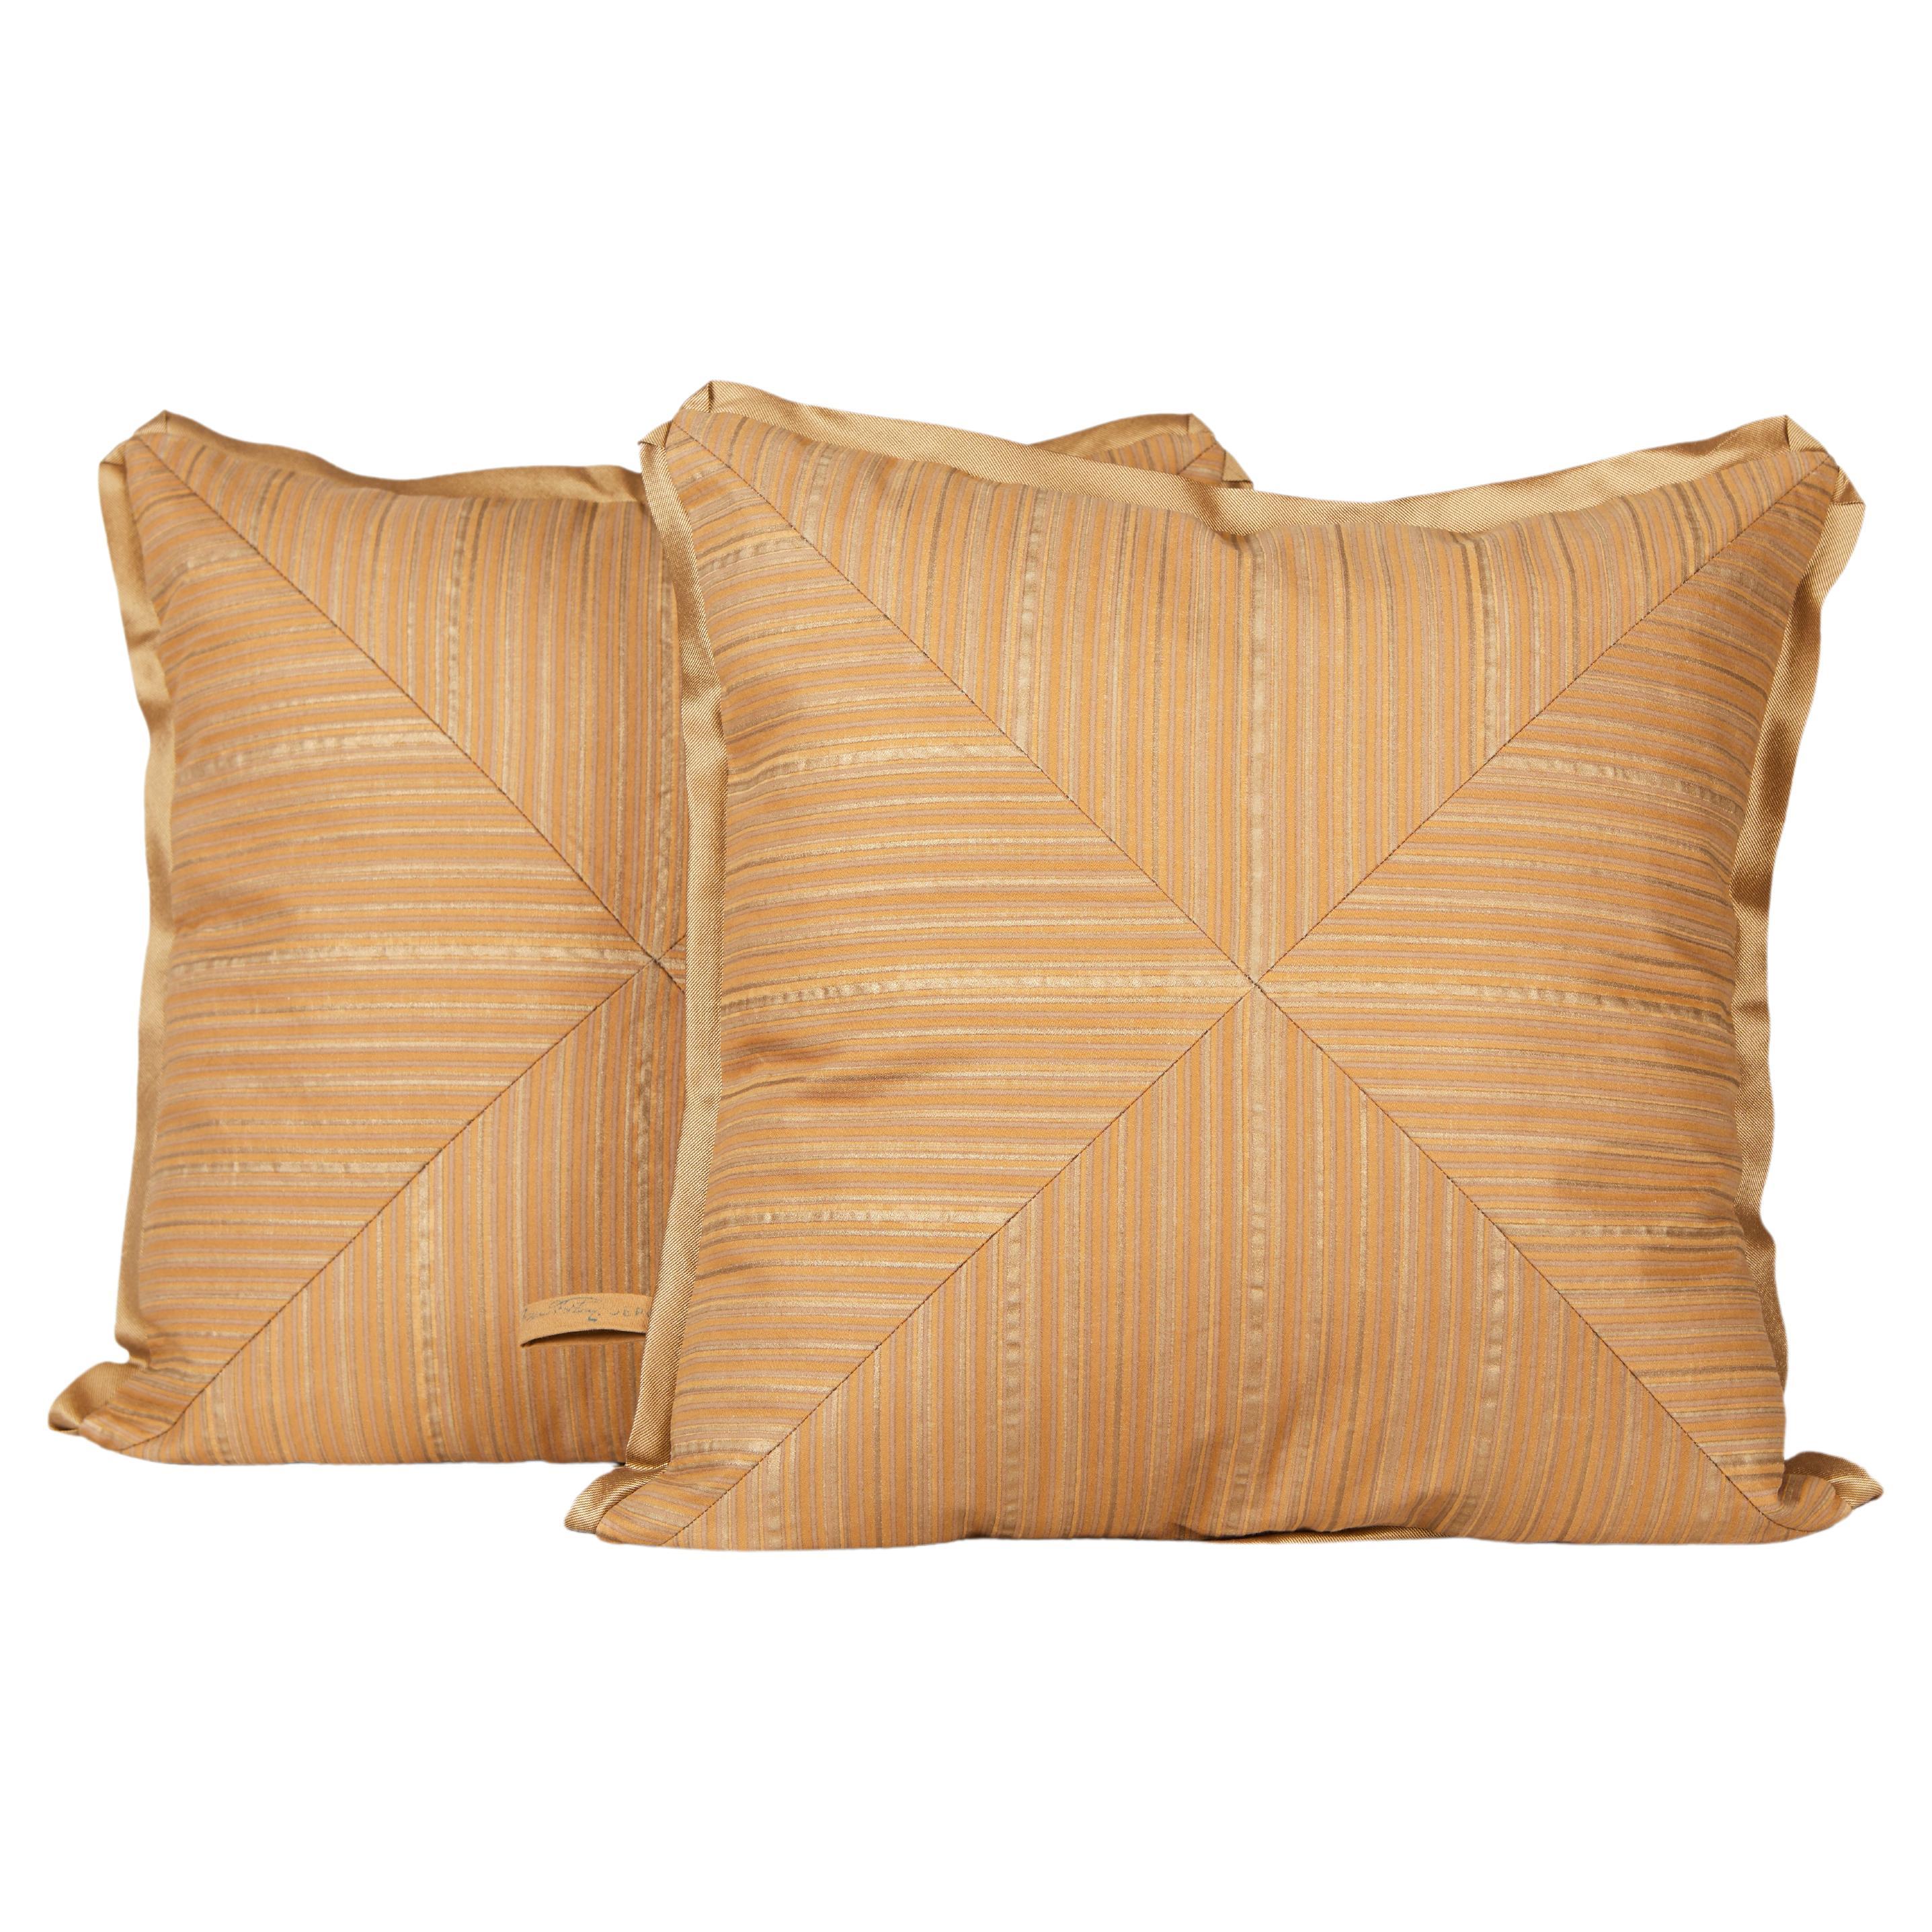 Pair of Mitered Fortuny Fabric Cushions in the Malmaison Pattern by David Duncan For Sale